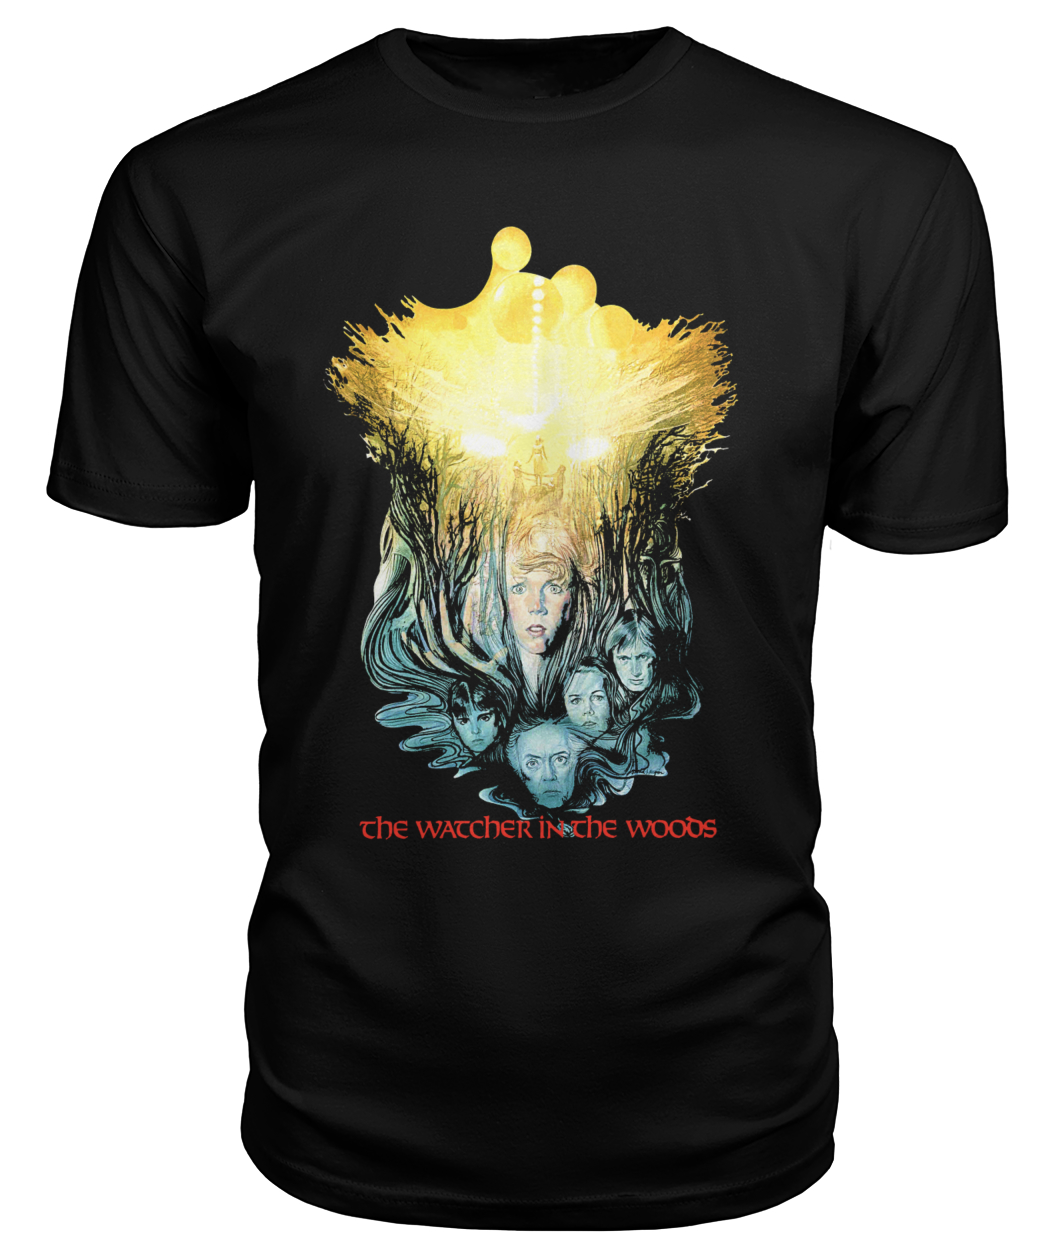 The Watcher in the Woods (1980) t-shirt 